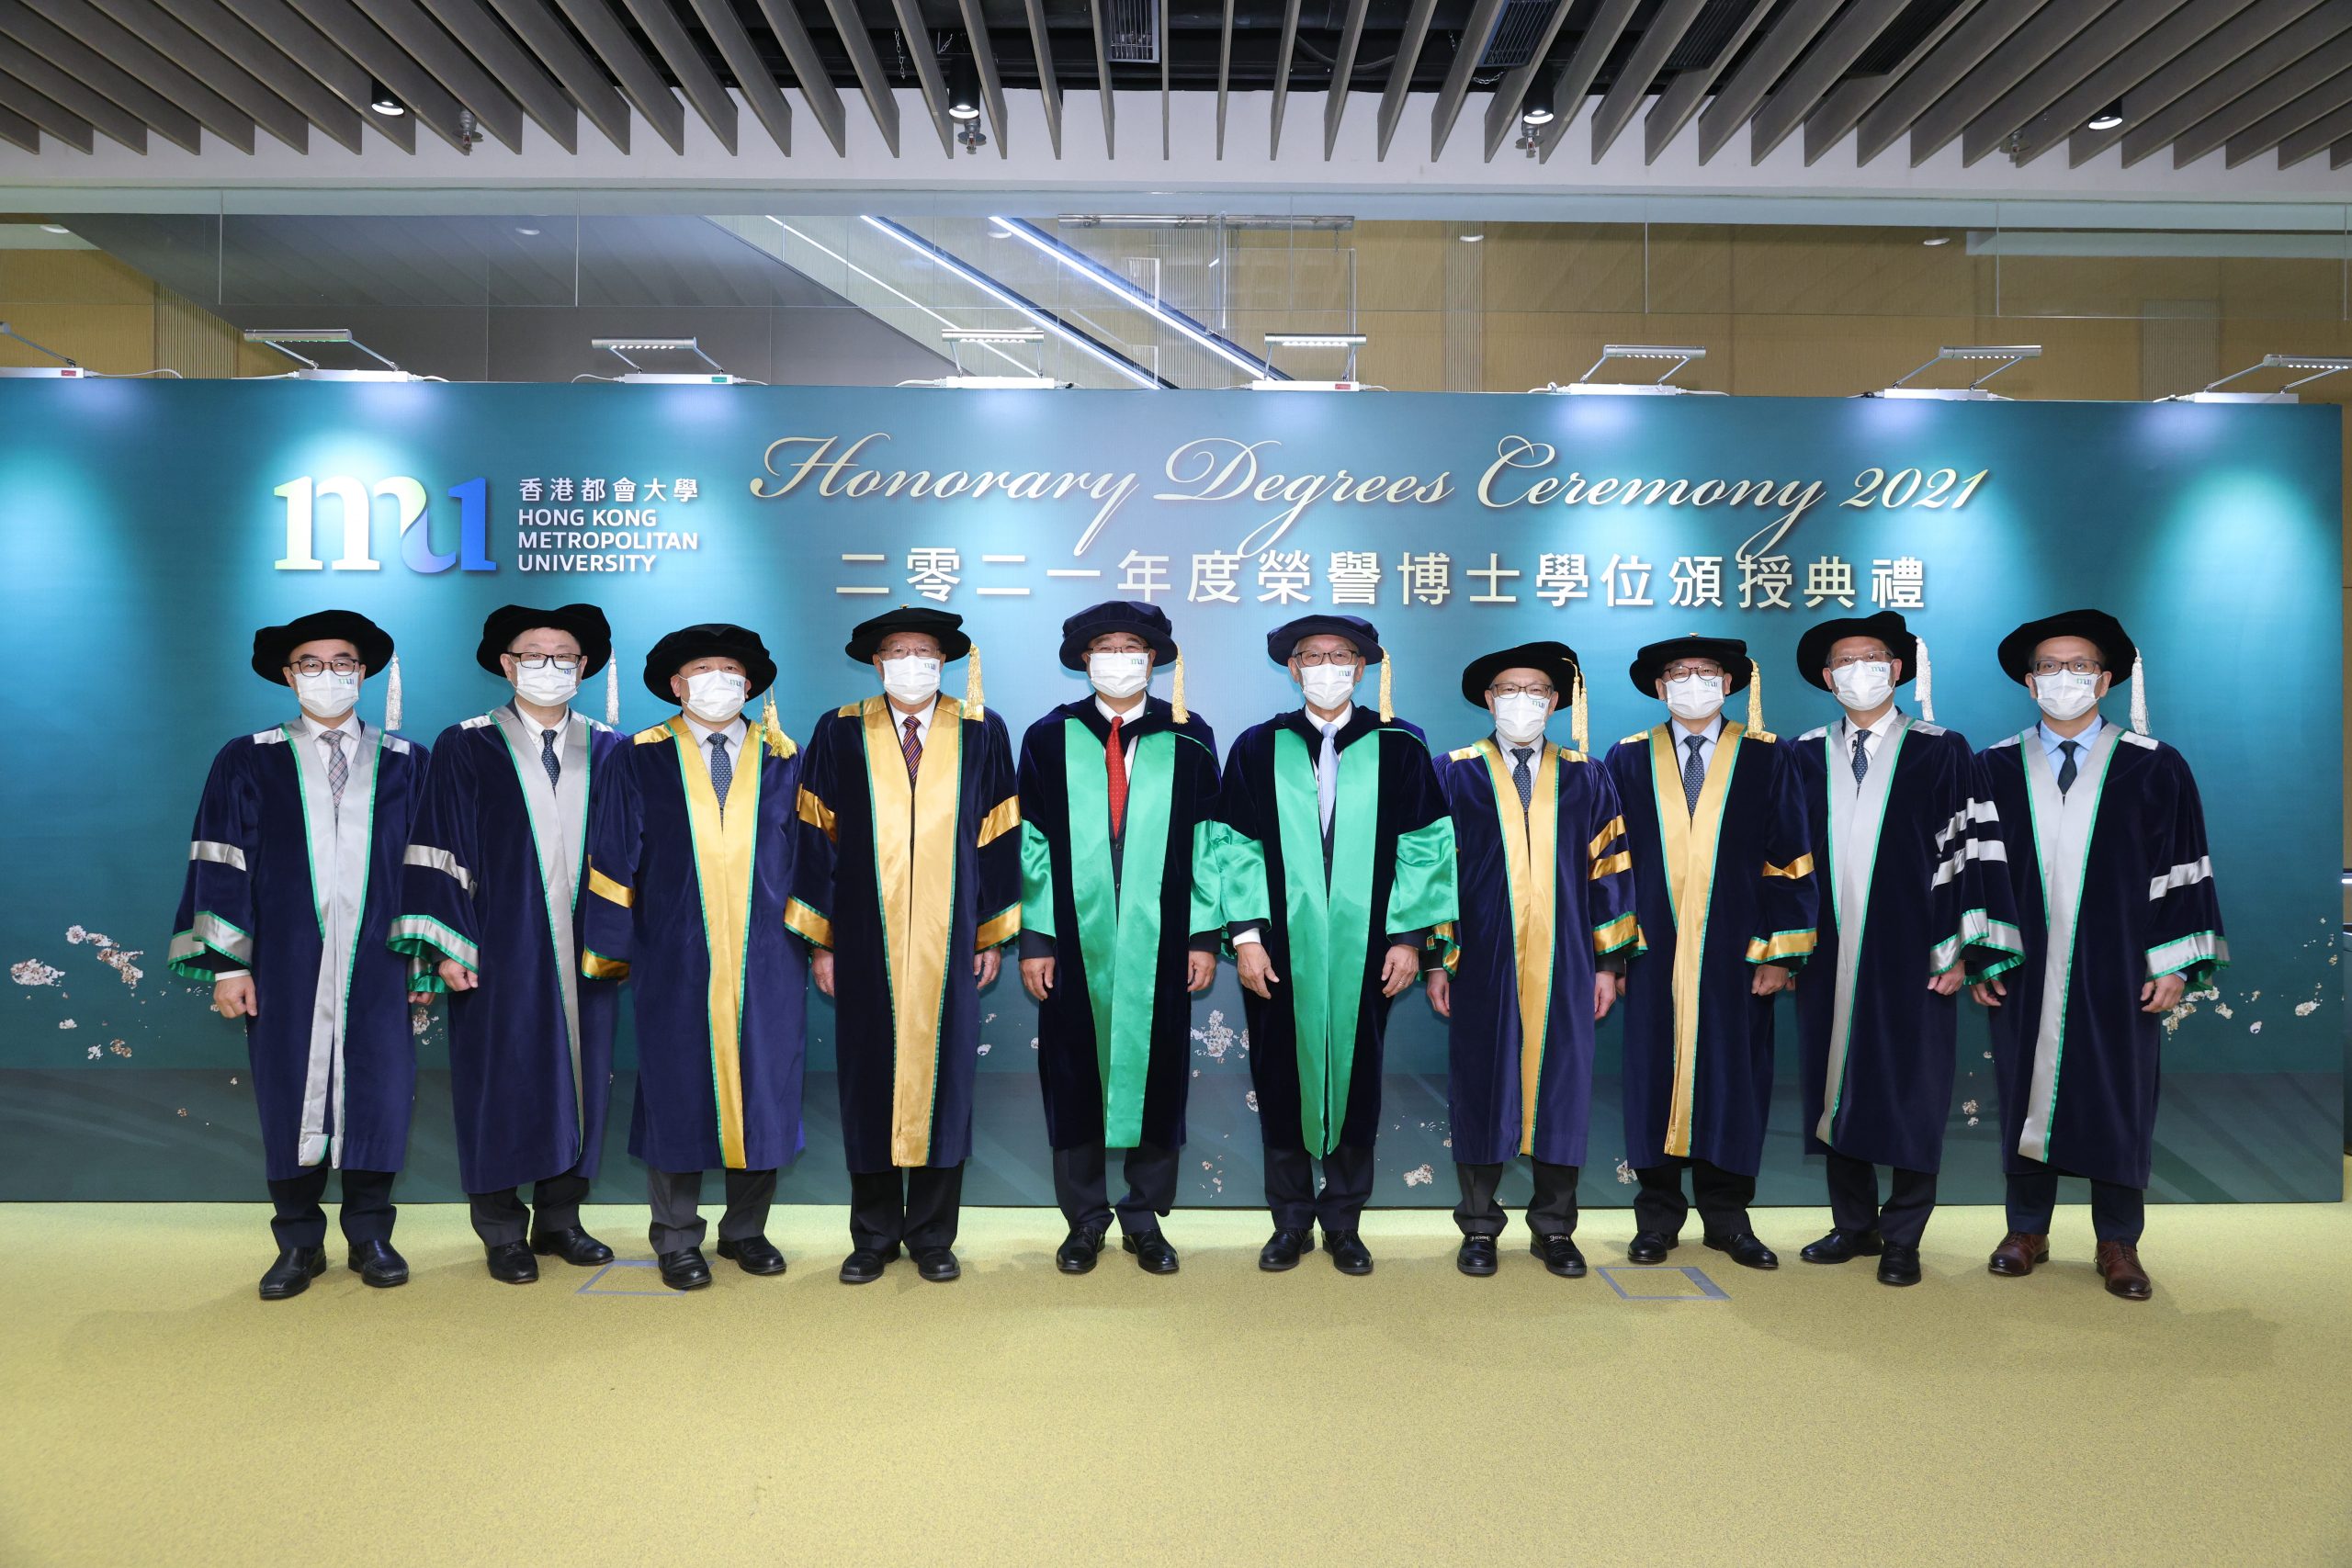 Group photo of the Principal Officers of Hong Kong Metropolitan University and two Honorary Doctorate recipients.